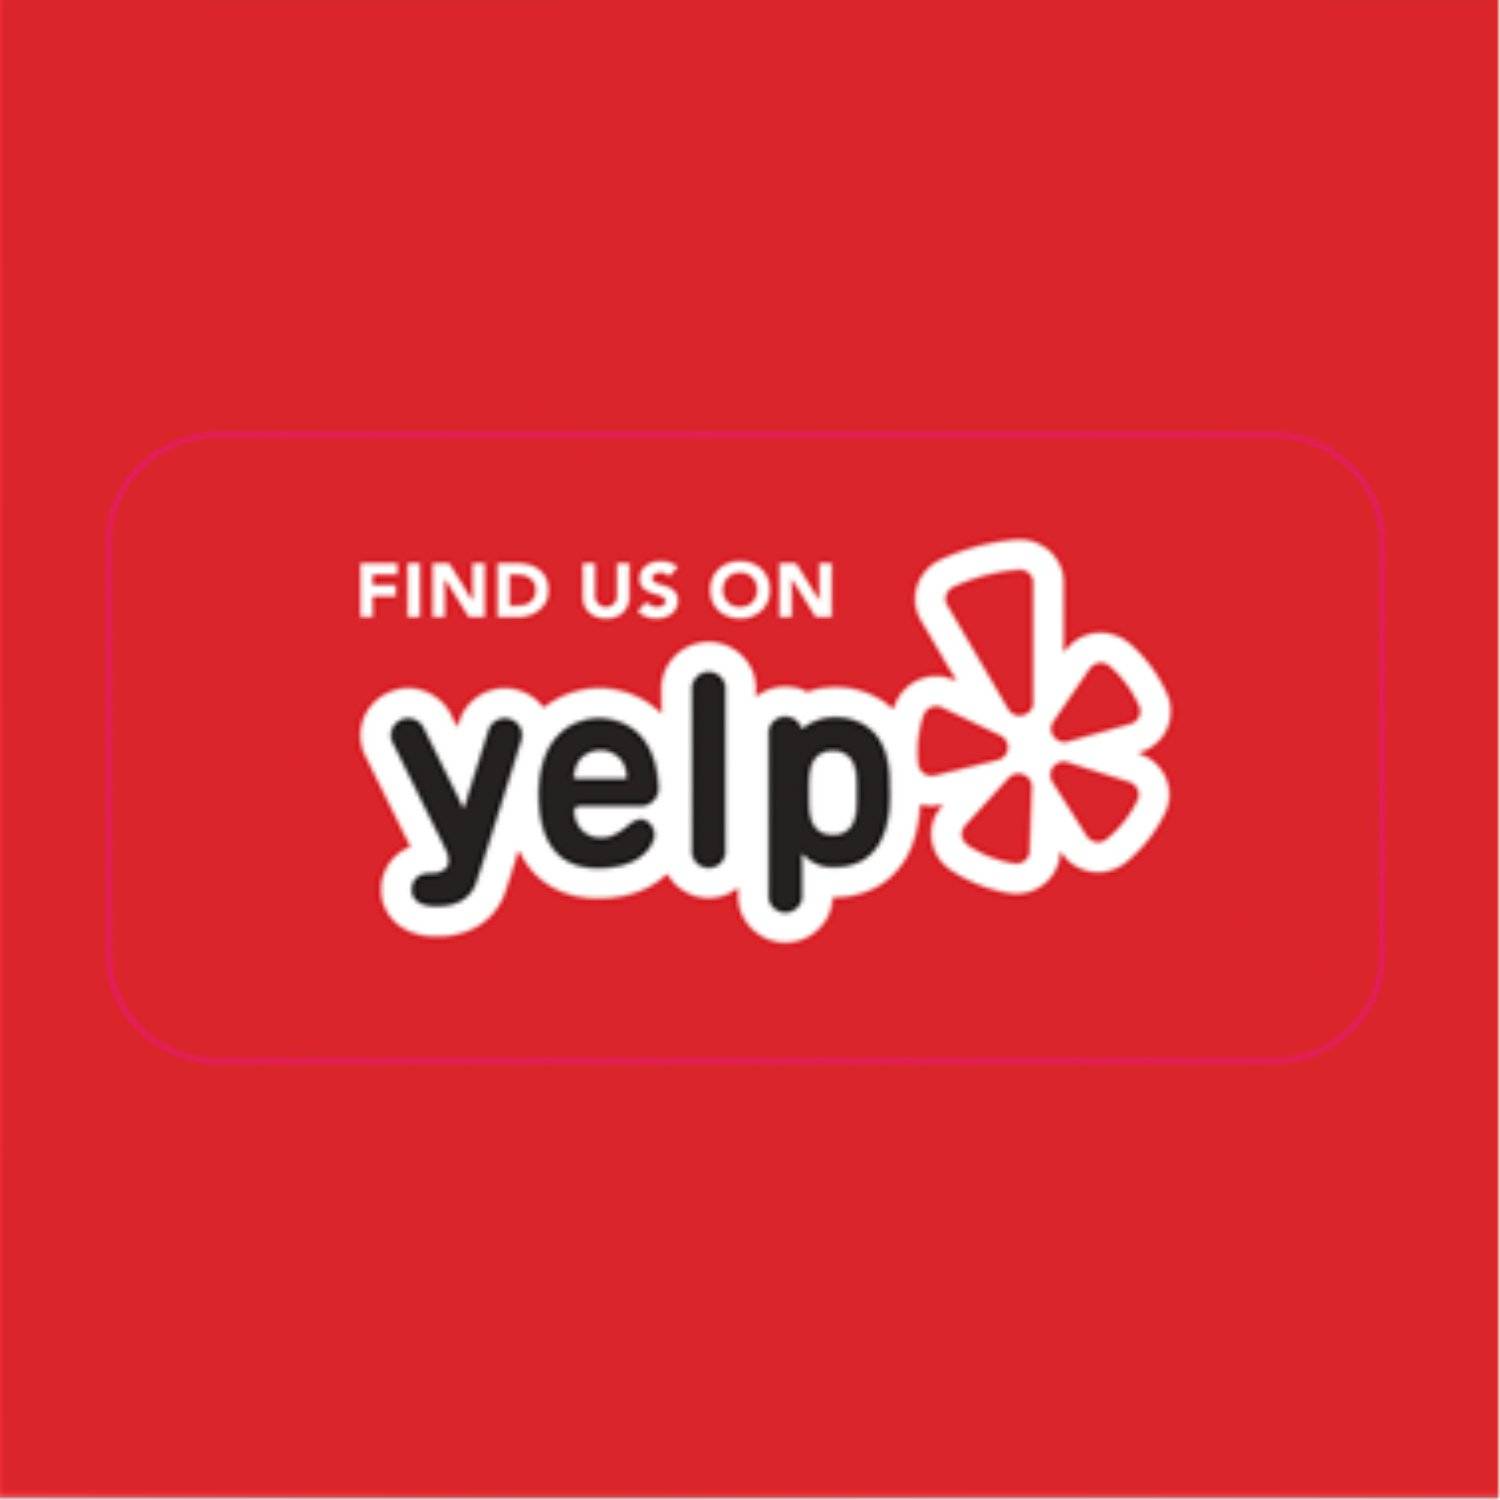 A red square with the text, "Find Us On Yelp" and the Yelp logo